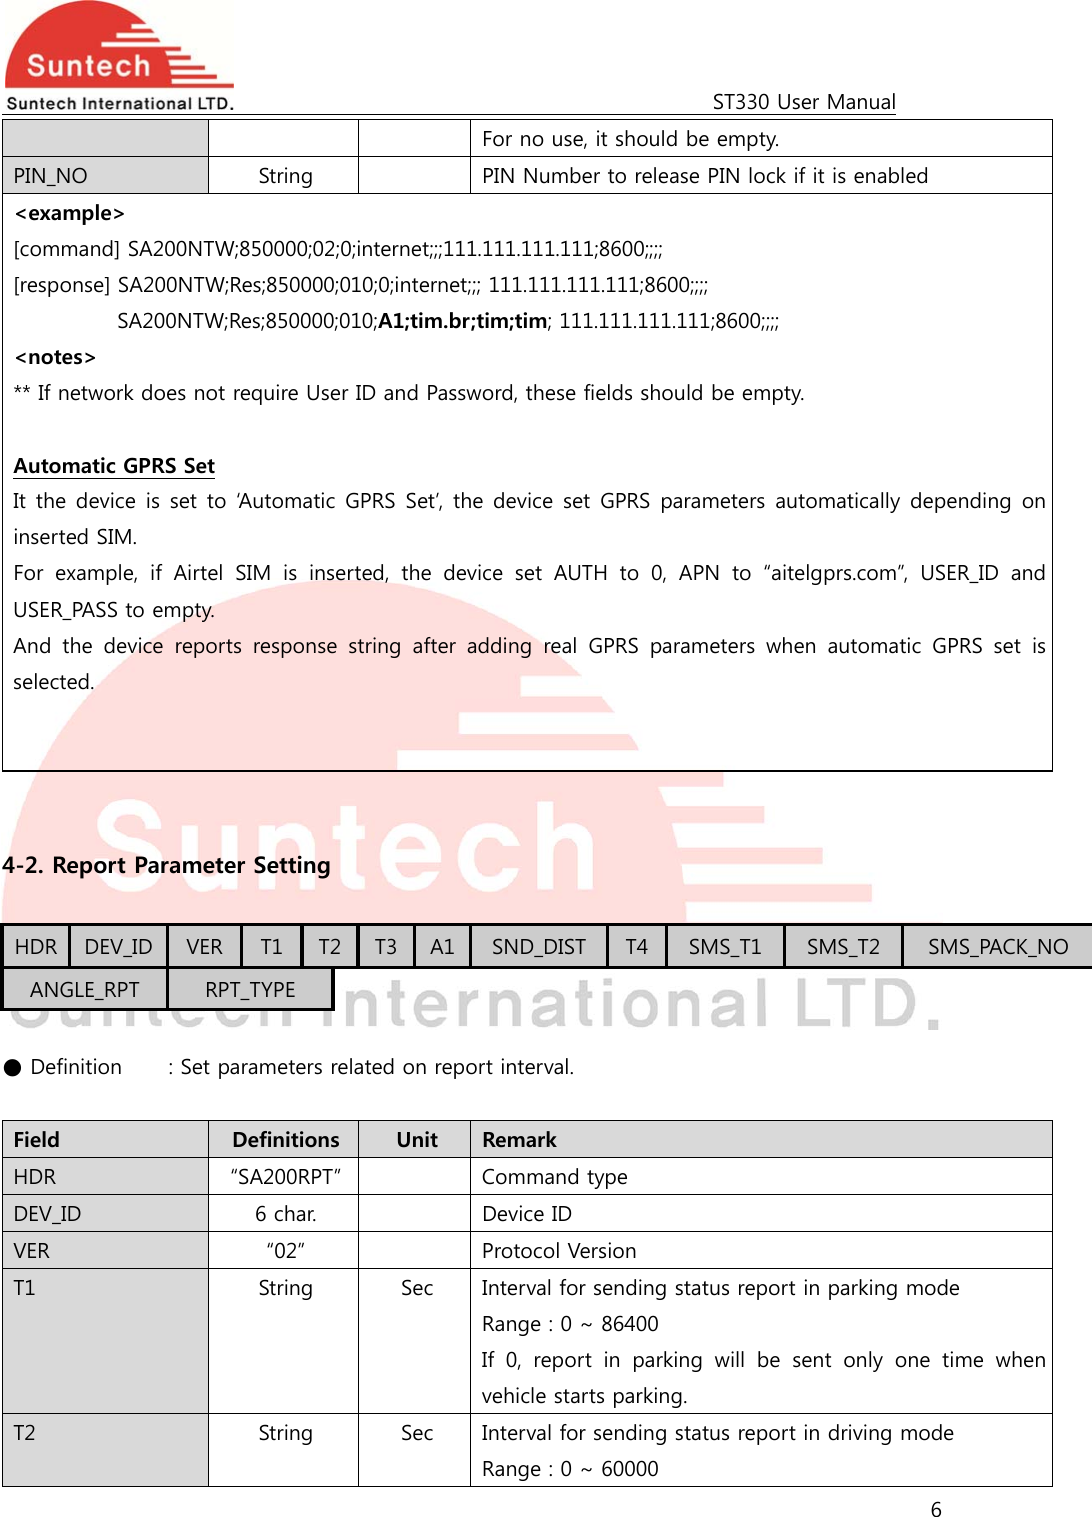                                                                                             ST330 User Manual 6  For no use, it should be empty. PIN_NO  String    PIN Number to release PIN lock if it is enabled &lt;example&gt; [command] SA200NTW;850000;02;0;internet;;;111.111.111.111;8600;;;;   [response] SA200NTW;Res;850000;010;0;internet;;; 111.111.111.111;8600;;;; SA200NTW;Res;850000;010;A1;tim.br;tim;tim; 111.111.111.111;8600;;;; &lt;notes&gt; ** If network does not require User ID and Password, these fields should be empty.  Automatic GPRS Set It the device  is  set  to ‘Automatic  GPRS Set’, the device set GPRS parameters  automatically depending on inserted SIM. For  example,  if  Airtel  SIM  is  inserted,  the  device  set  AUTH  to  0, APN to “aitelgprs.com”, USER_ID and USER_PASS to empty. And  the  device  reports  response  string after adding real GPRS parameters  when  automatic  GPRS  set  is selected.     4-2. Report Parameter Setting  HDR  DEV_ID  VER T1  T2  T3 A1 SND_DIST  T4 SMS_T1  SMS_T2  SMS_PACK_NO ANGLE_RPT  RPT_TYPE  ● Definition   : Set parameters related on report interval.  Field  Definitions  Unit  Remark HDR  “SA200RPT”    Command type DEV_ID  6 char.    Device ID VER  “02”    Protocol Version T1  String  Sec  Interval for sending status report in parking mode Range : 0 ~ 86400 If  0,  report  in  parking  will  be  sent  only  one  time  when vehicle starts parking. T2  String  Sec  Interval for sending status report in driving mode Range : 0 ~ 60000 